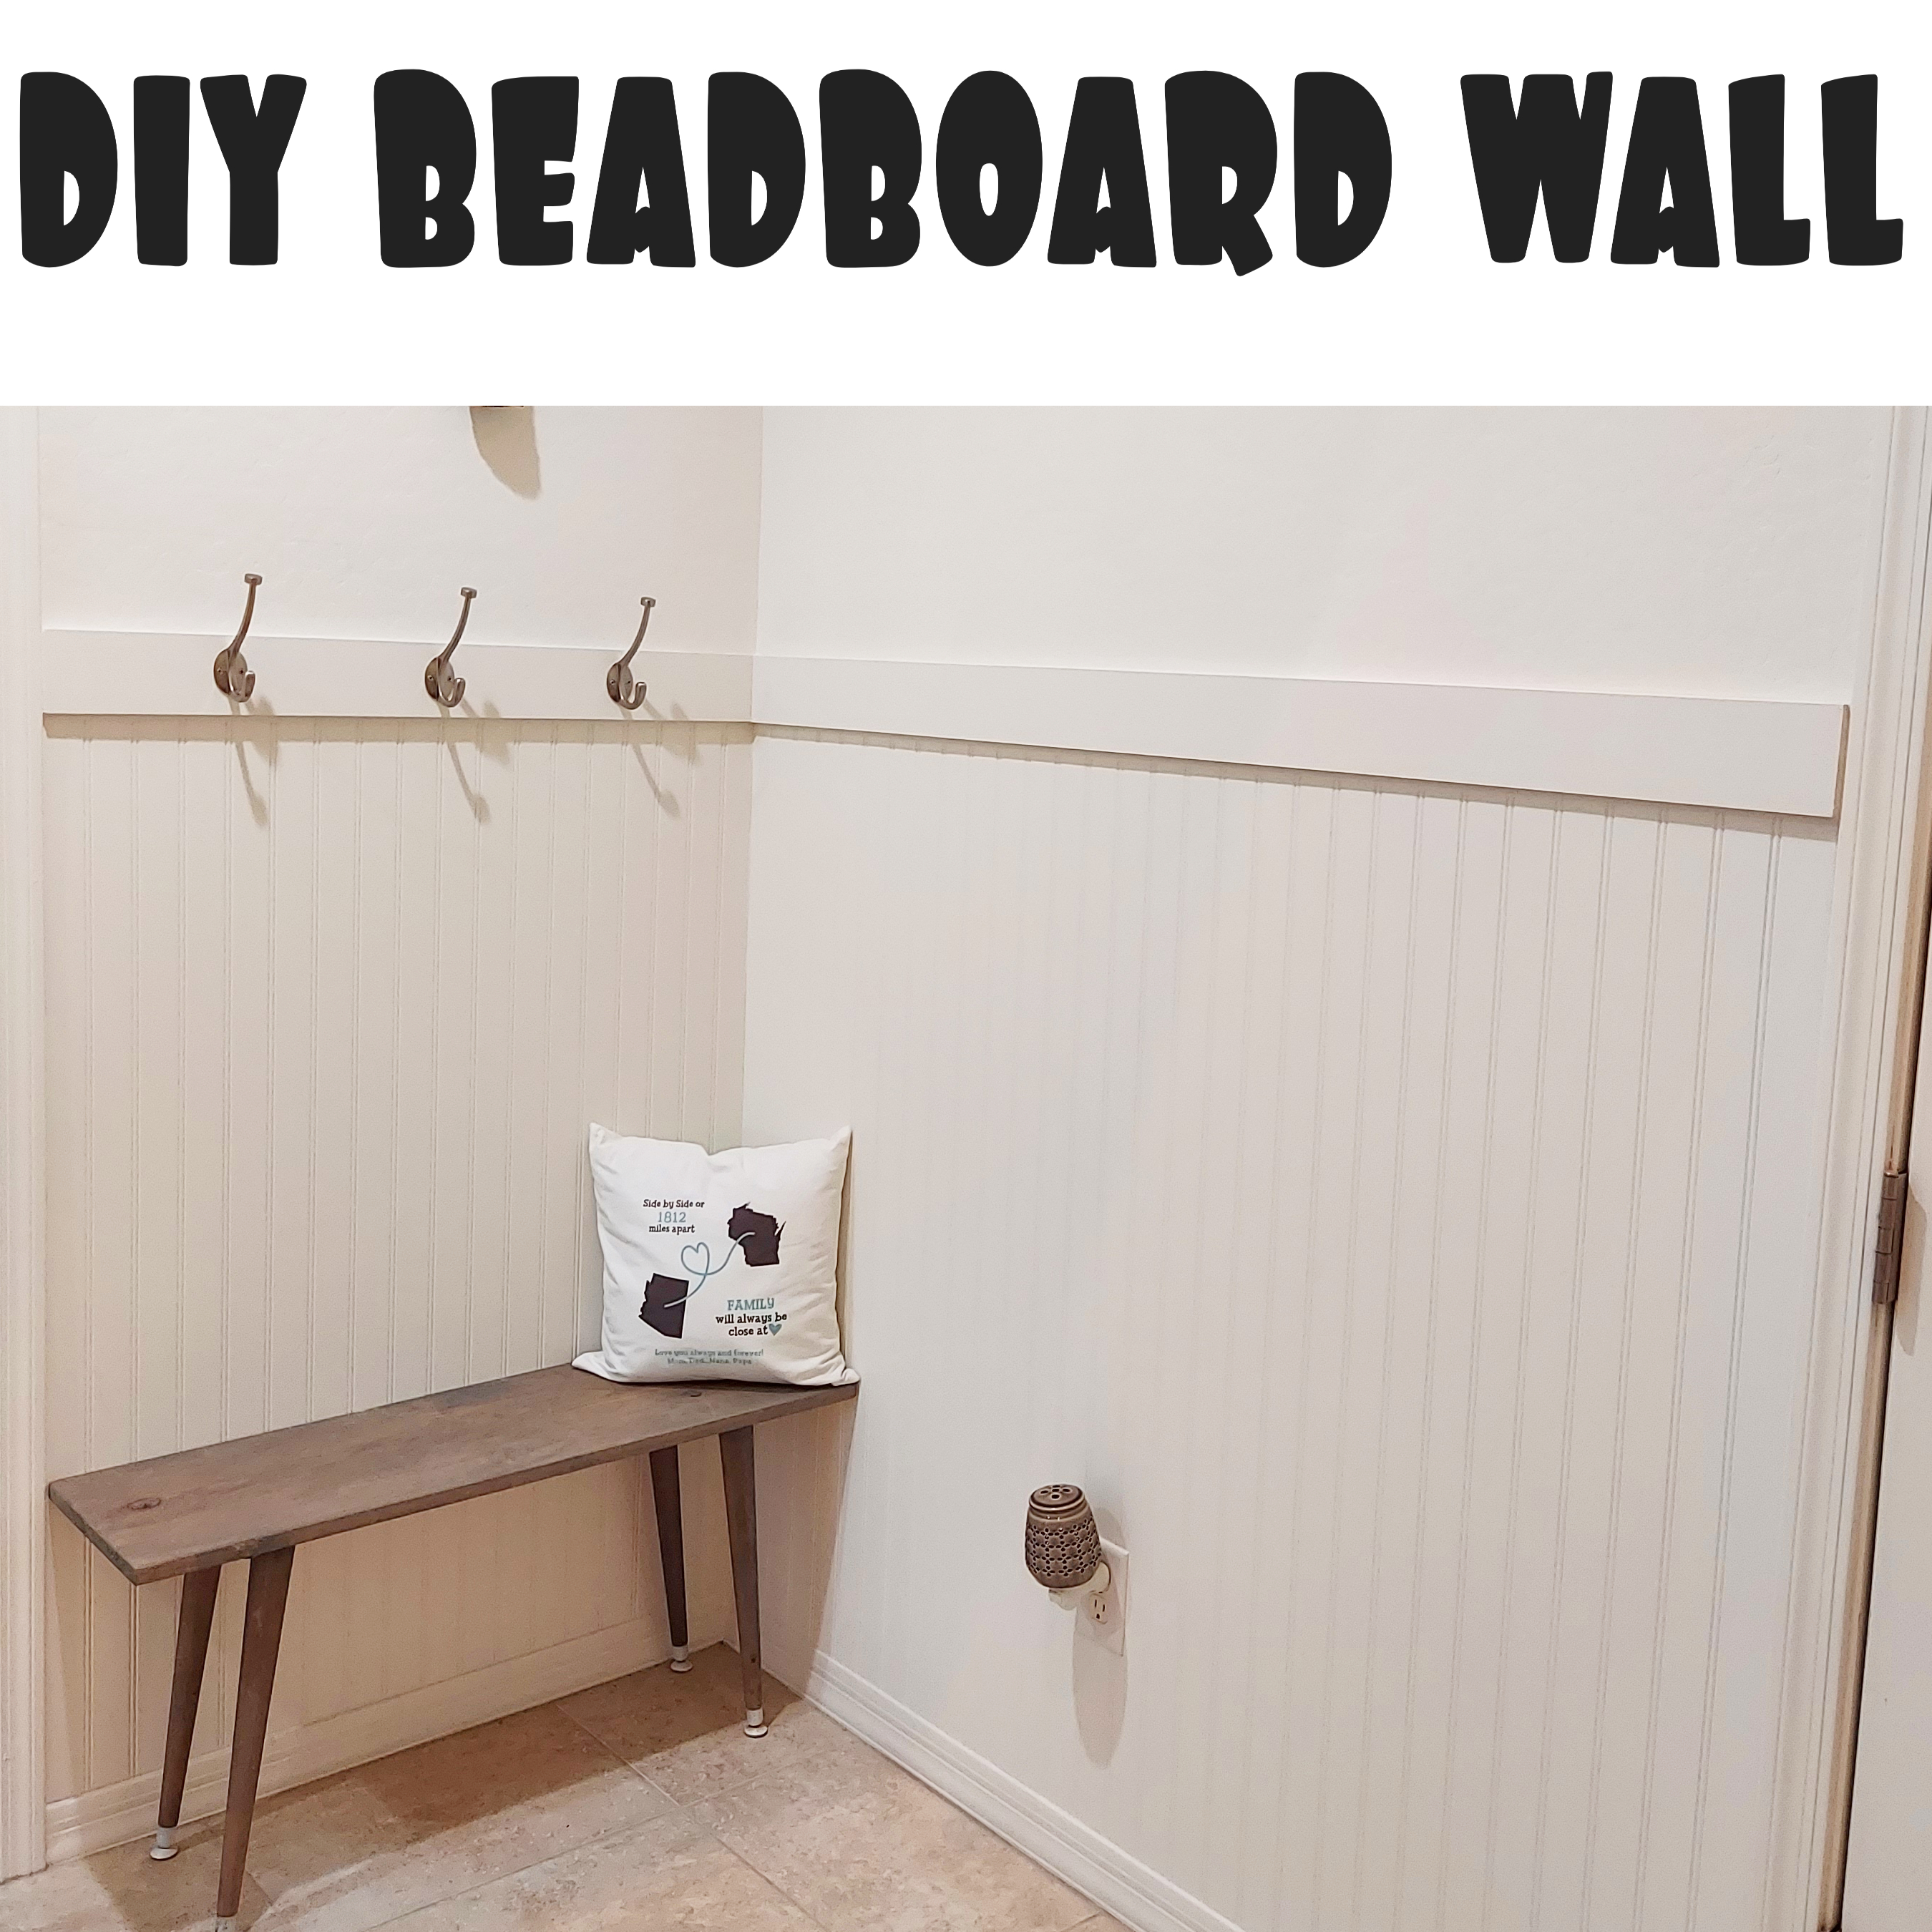 Our DIY Beadboard Wall Treatment with Hooks + Countertop - Yellow Brick Home